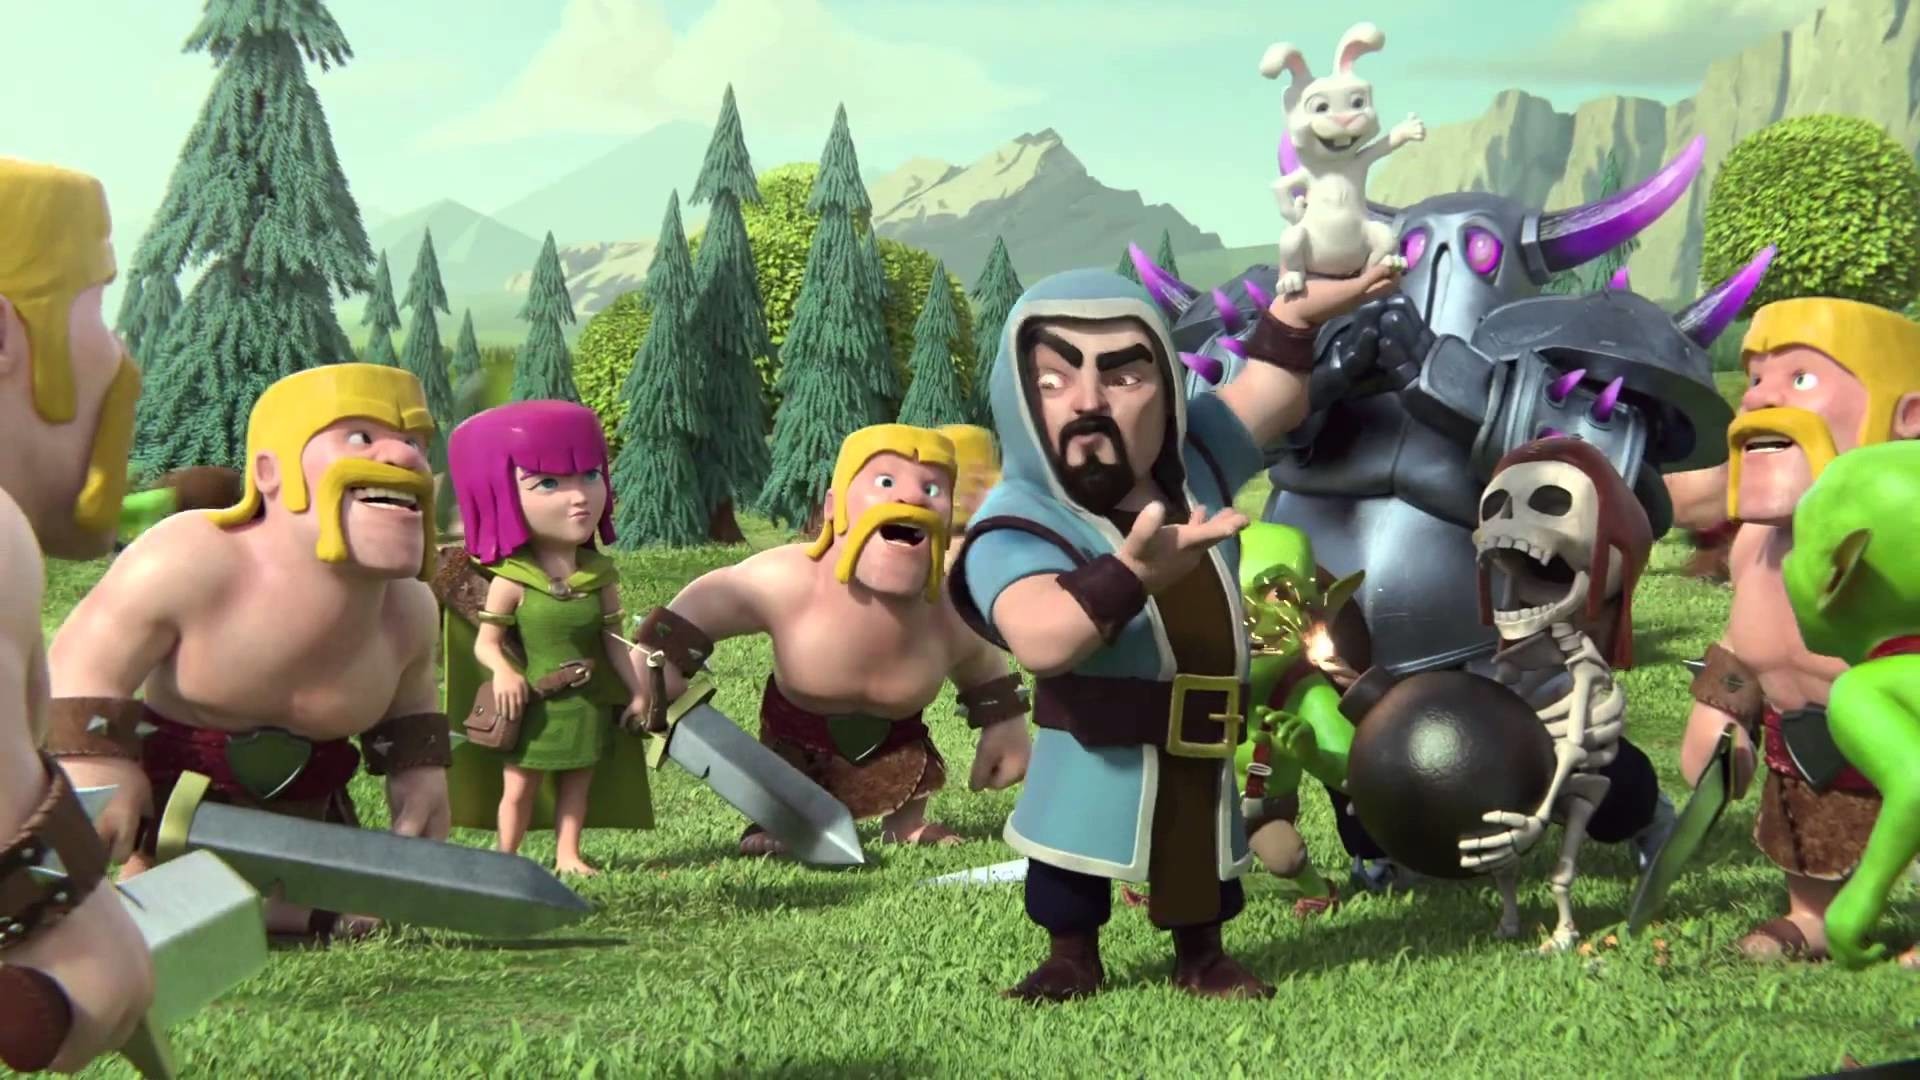 Download Clash Of Clans Chrome New tab & Wallpapers Cool Wallpapers app...